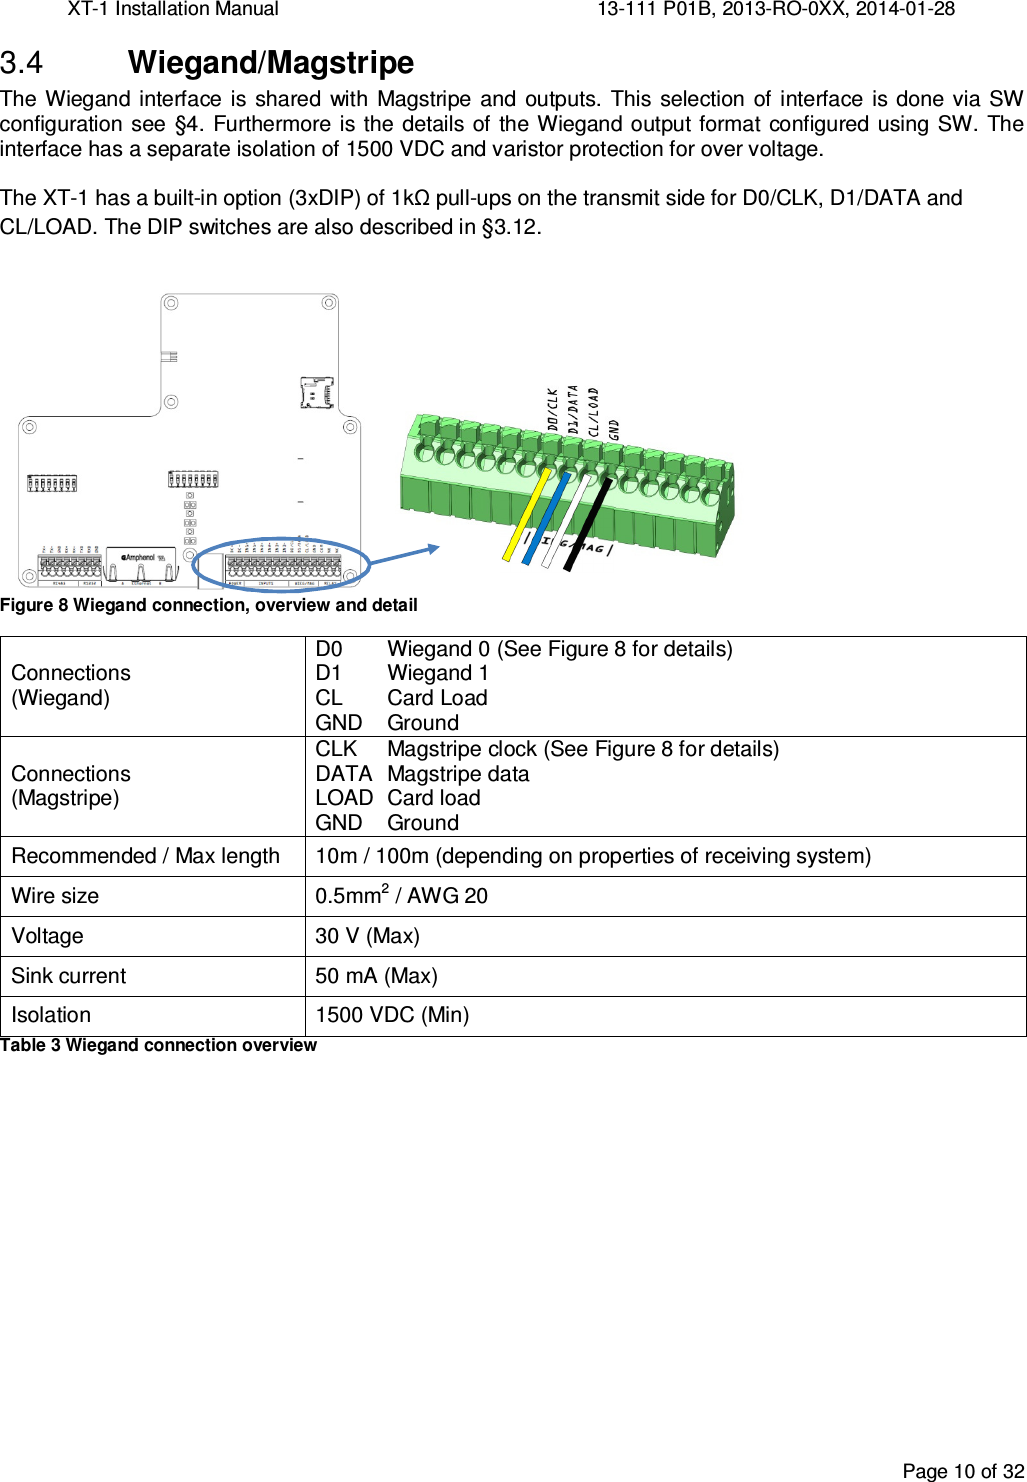 XT-1 Installation Manual     13-111 P01B, 2013-RO-0XX, 2014-01-28  Page 10 of 32   Wiegand/Magstripe 3.4The  Wiegand  interface is  shared with  Magstripe  and  outputs.  This  selection  of interface  is done  via SW configuration see  §4.  Furthermore is the details of the Wiegand output format  configured using SW.  The interface has a separate isolation of 1500 VDC and varistor protection for over voltage.  The XT-1 has a built-in option (3xDIP) of 1kΩ pull-ups on the transmit side for D0/CLK, D1/DATA and CL/LOAD. The DIP switches are also described in §3.12.  Figure 8 Wiegand connection, overview and detail Connections (Wiegand) D0  Wiegand 0 (See Figure 8 for details) D1  Wiegand 1 CL  Card Load GND  Ground  Connections (Magstripe) CLK  Magstripe clock (See Figure 8 for details) DATA  Magstripe data LOAD  Card load GND  Ground Recommended / Max length  10m / 100m (depending on properties of receiving system) Wire size  0.5mm2 / AWG 20 Voltage  30 V (Max) Sink current  50 mA (Max) Isolation  1500 VDC (Min) Table 3 Wiegand connection overview   